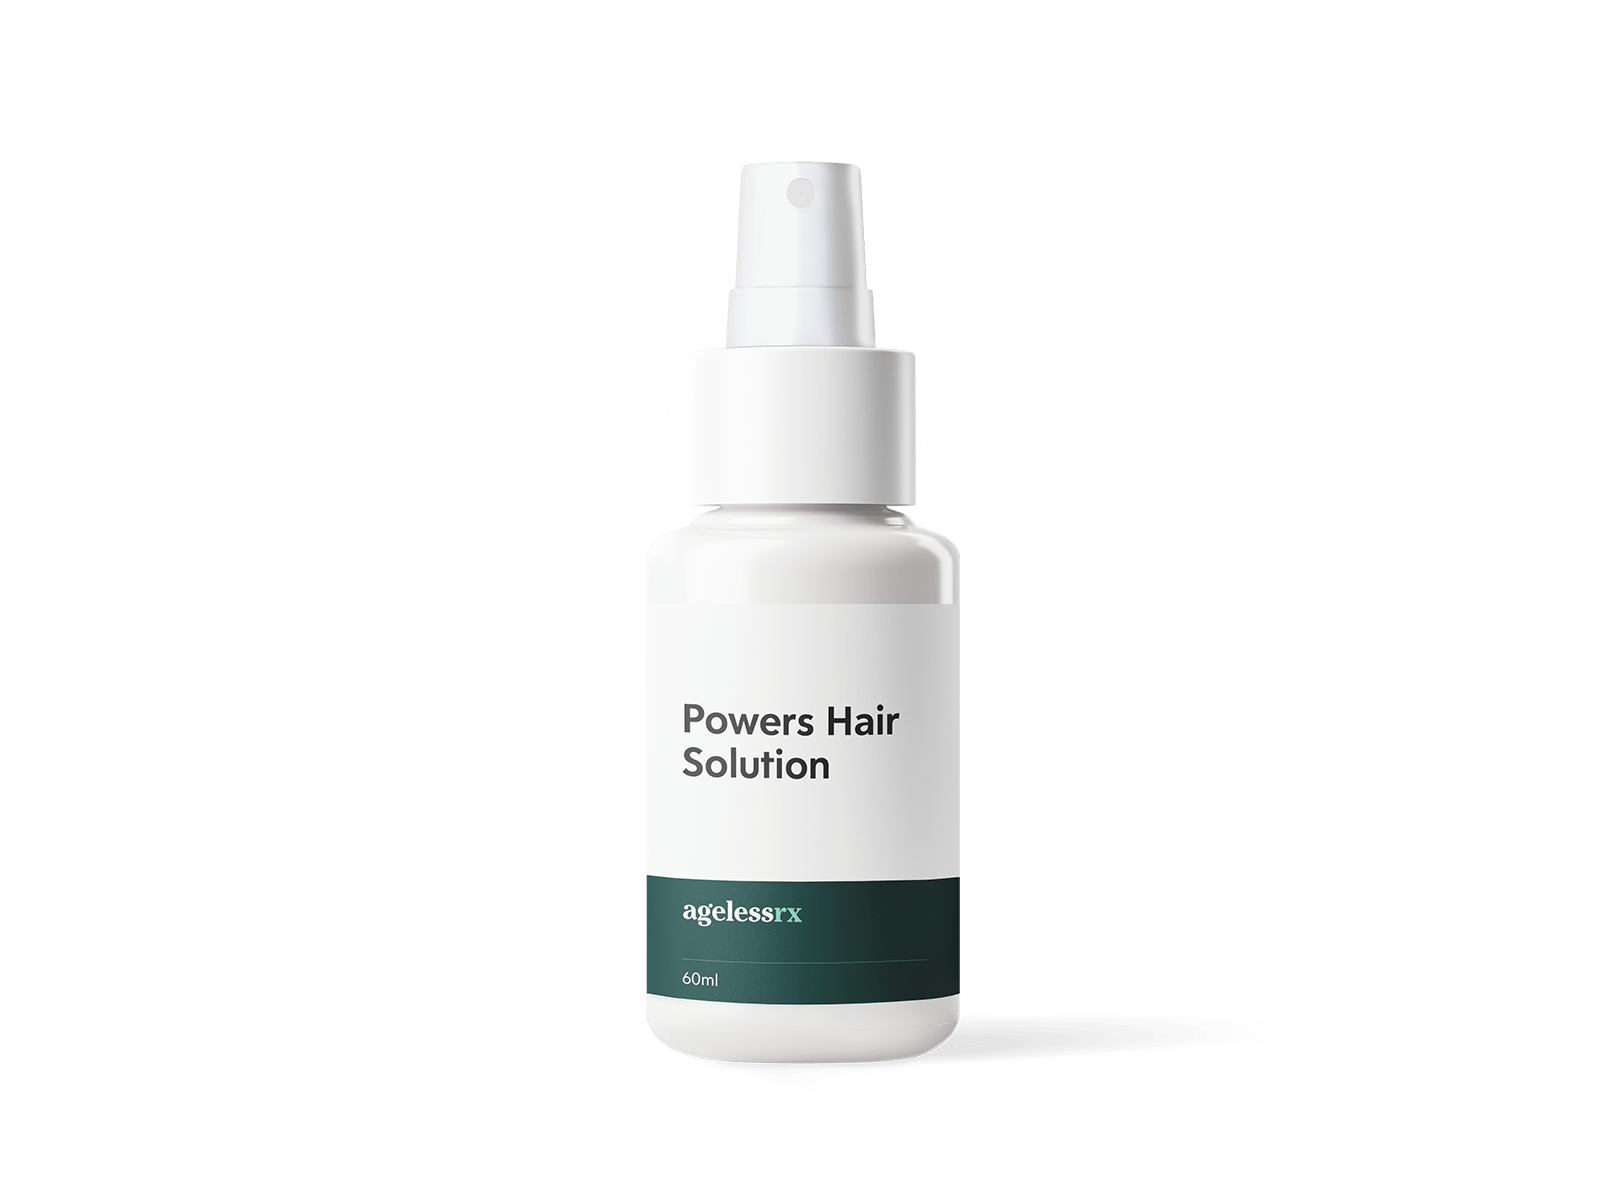 Product image for Powers Hair Solution v5.1